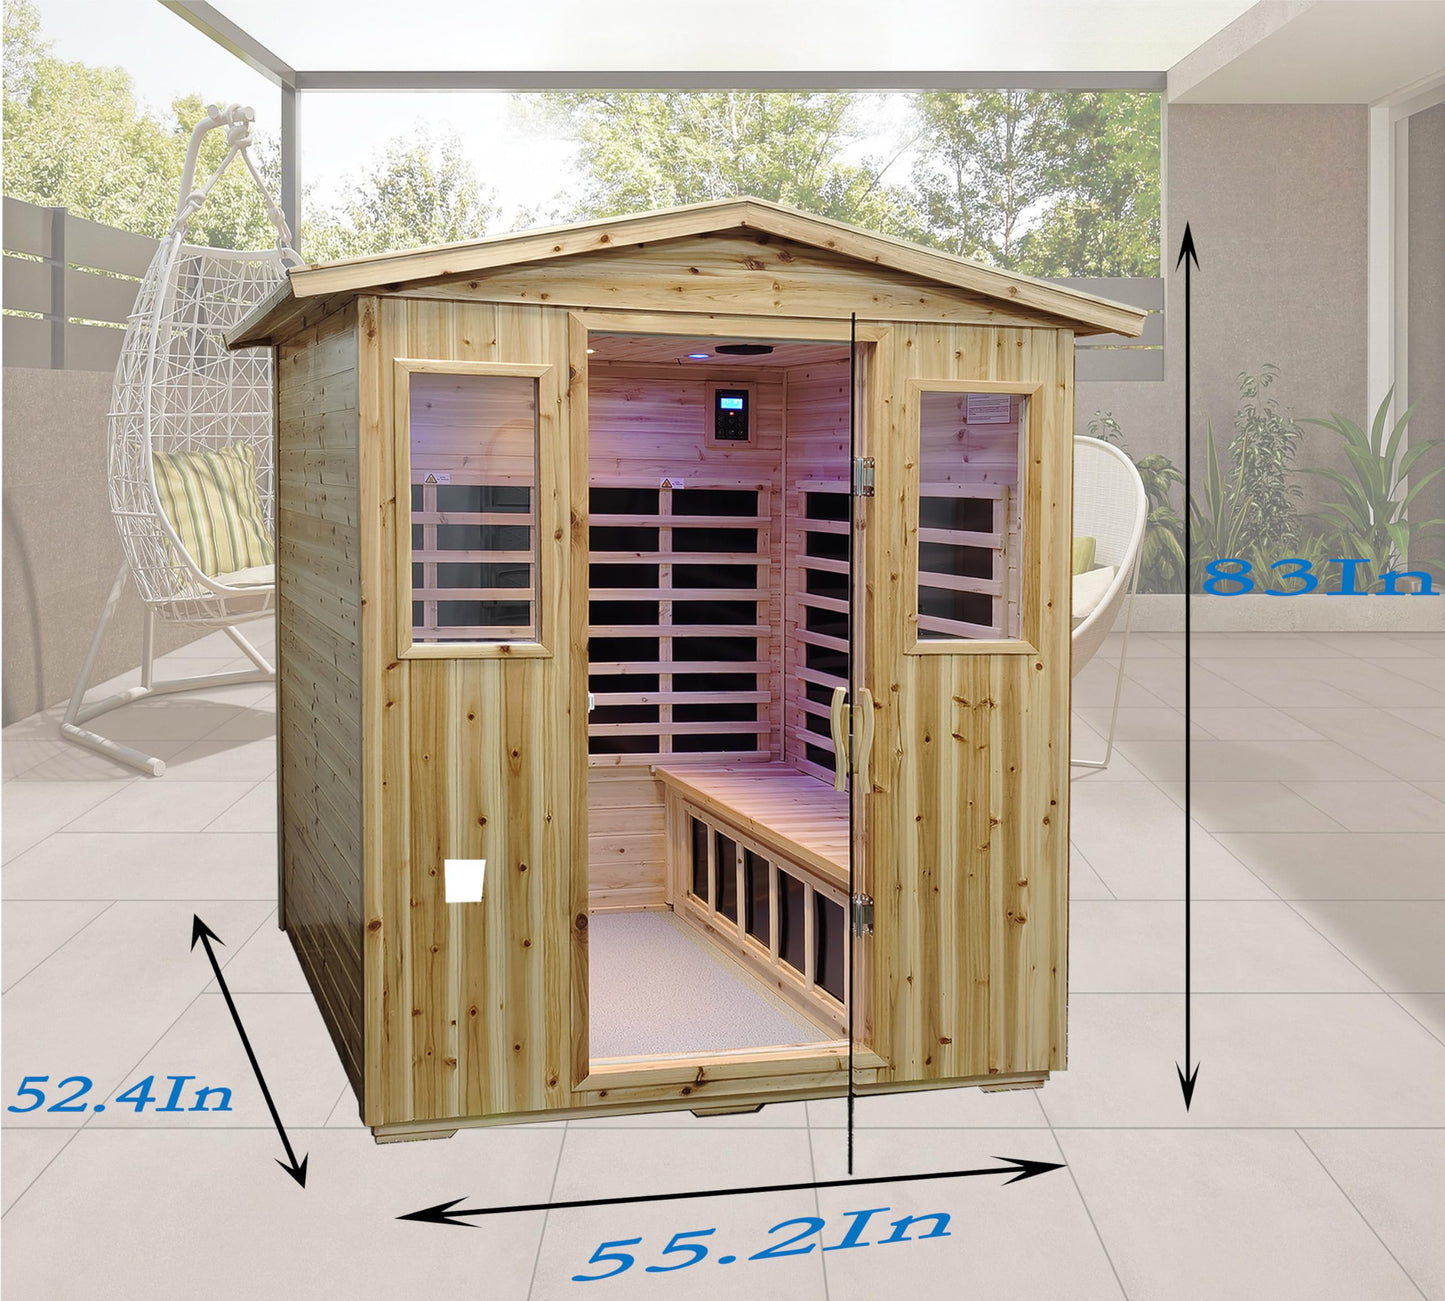 LTCCDSS Outdoor Far Infrared Sauna 4 Person | Withstand Temp -5℉-104℉, Outdoor Indoor Wooden Sauna Room for Home-12 Low EMF Boards-Canadian